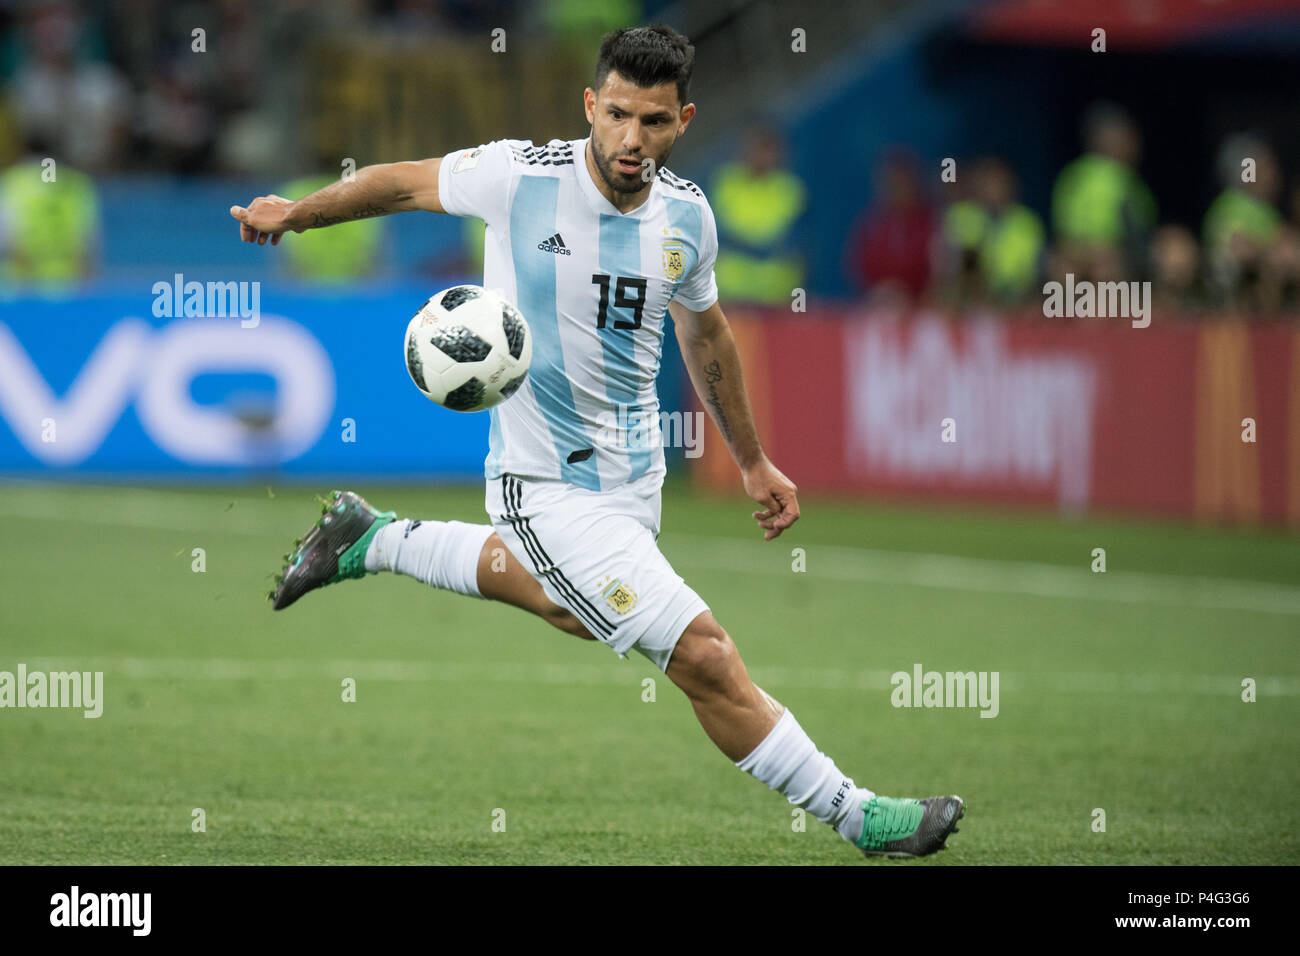 Nizhny Novgorod, Russia. 21 June 2018.  Sergio AGUERO (ARG) with Ball, Individual with ball, Action, Full figure, Argentina (ARG) - Croatia (CRO) 0: 3, Preliminary round, Group D, Game 23, on 06/21/2018 in Moscow; Football World Cup 2018 in Russia from 14.06. - 15.07.2018. | usage worldwide Credit: dpa/Alamy Live News Credit: dpa picture alliance/Alamy Live News Stock Photo